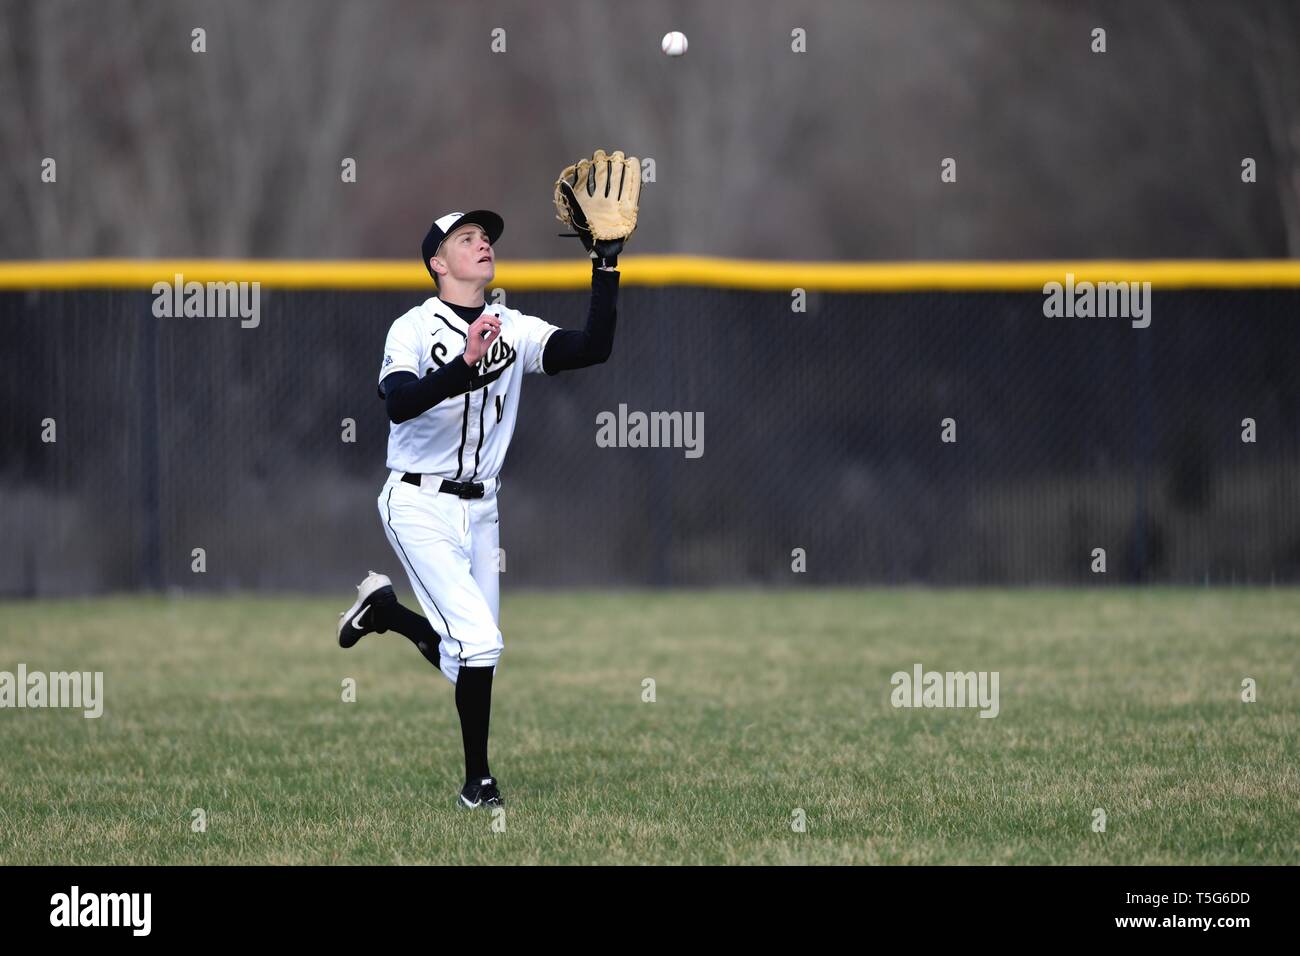 Outfielder making a running catch of a fly ball. USA. Stock Photo